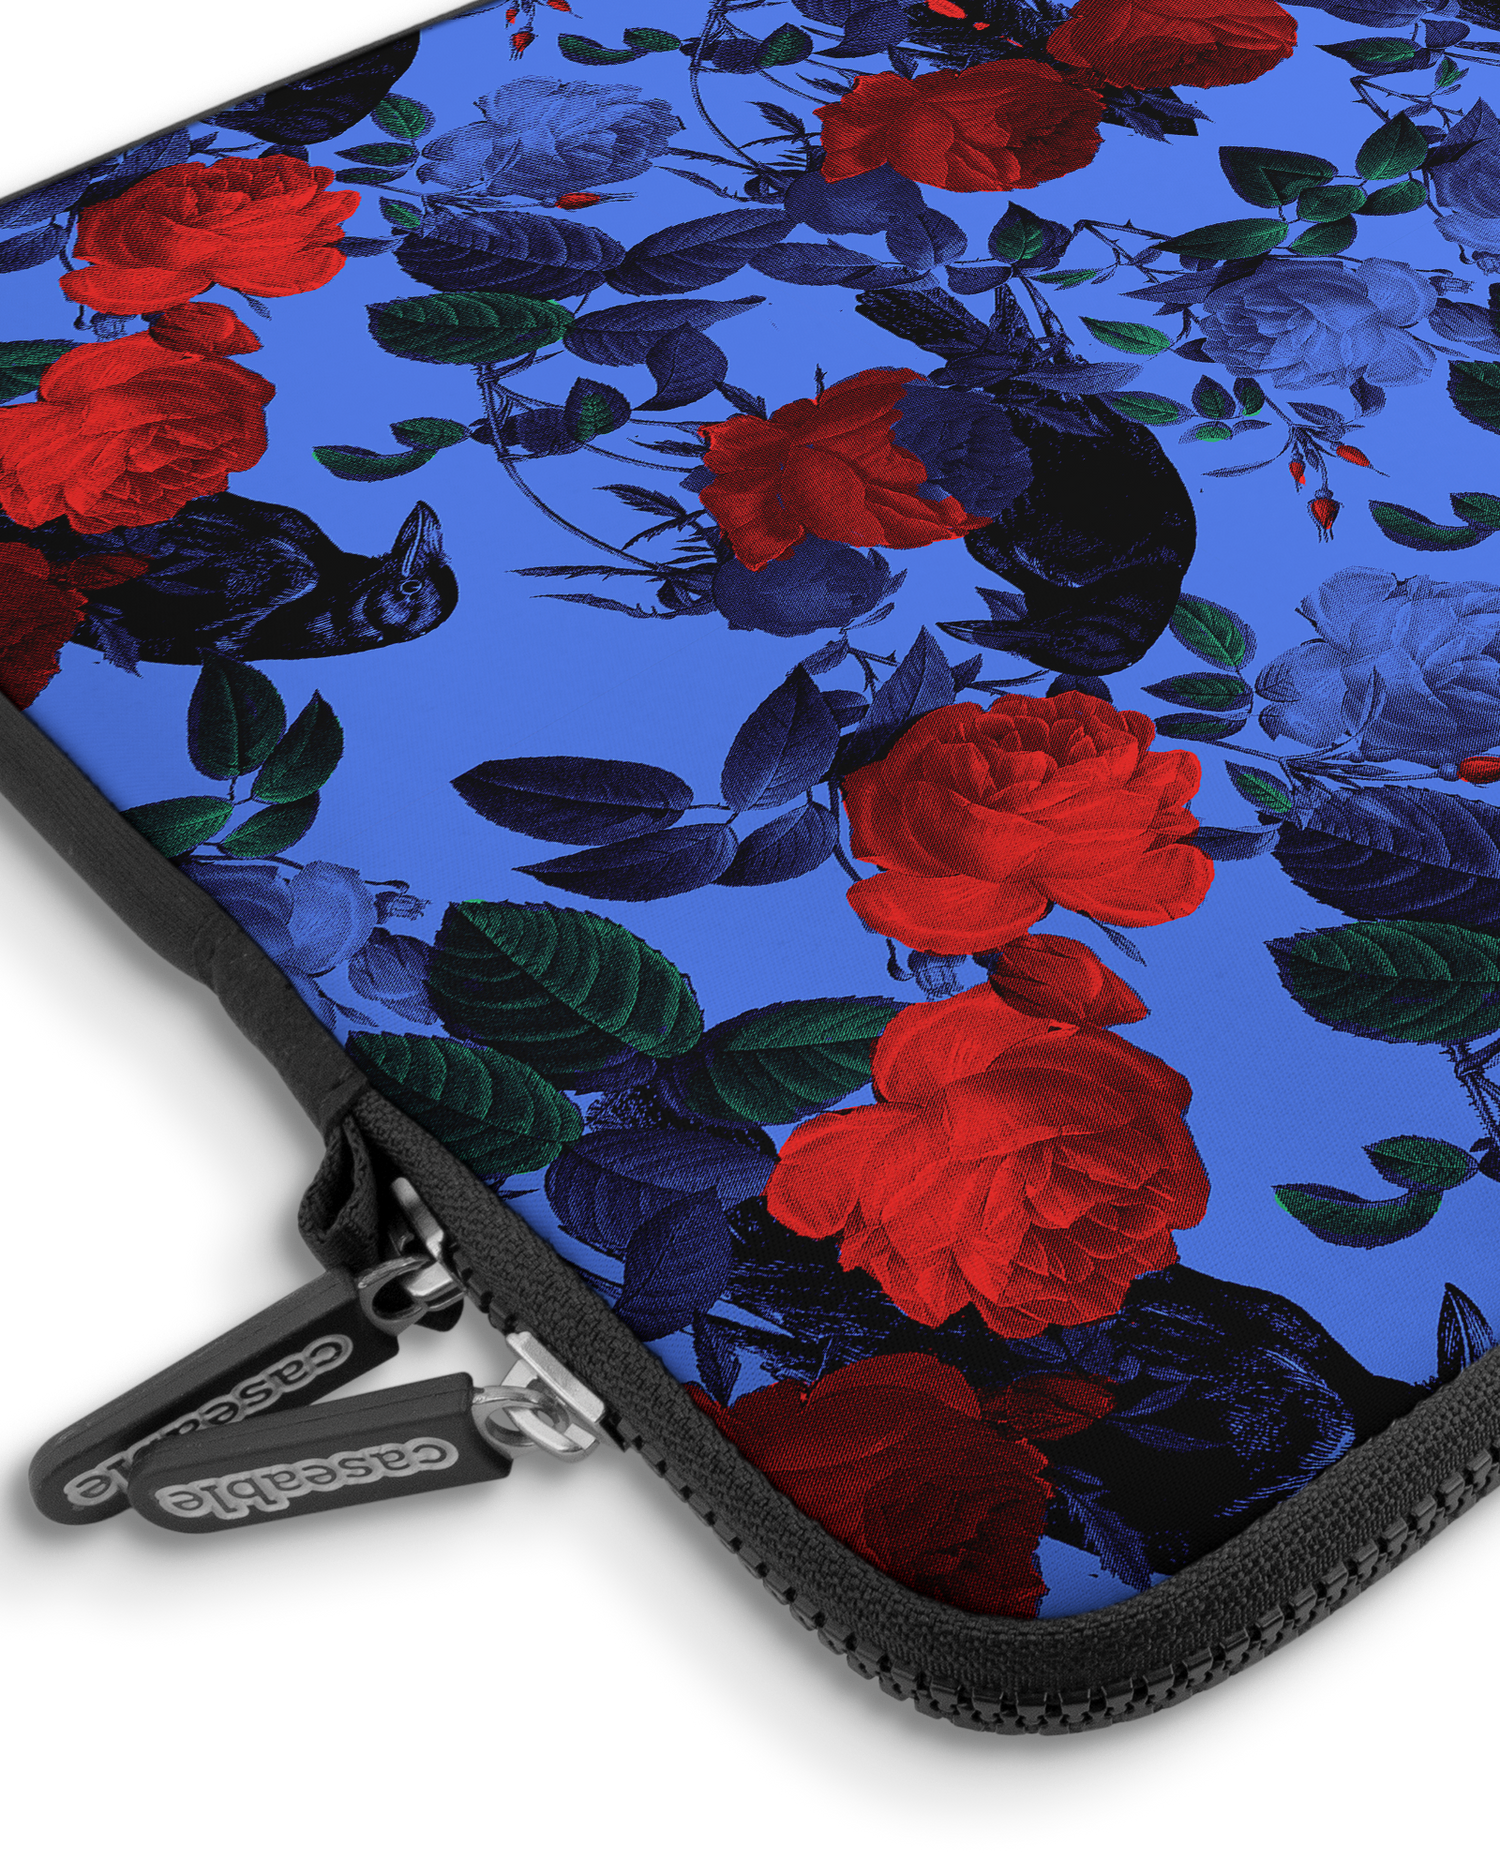 Roses And Ravens Premium Laptop Bag 15 inch with device inside